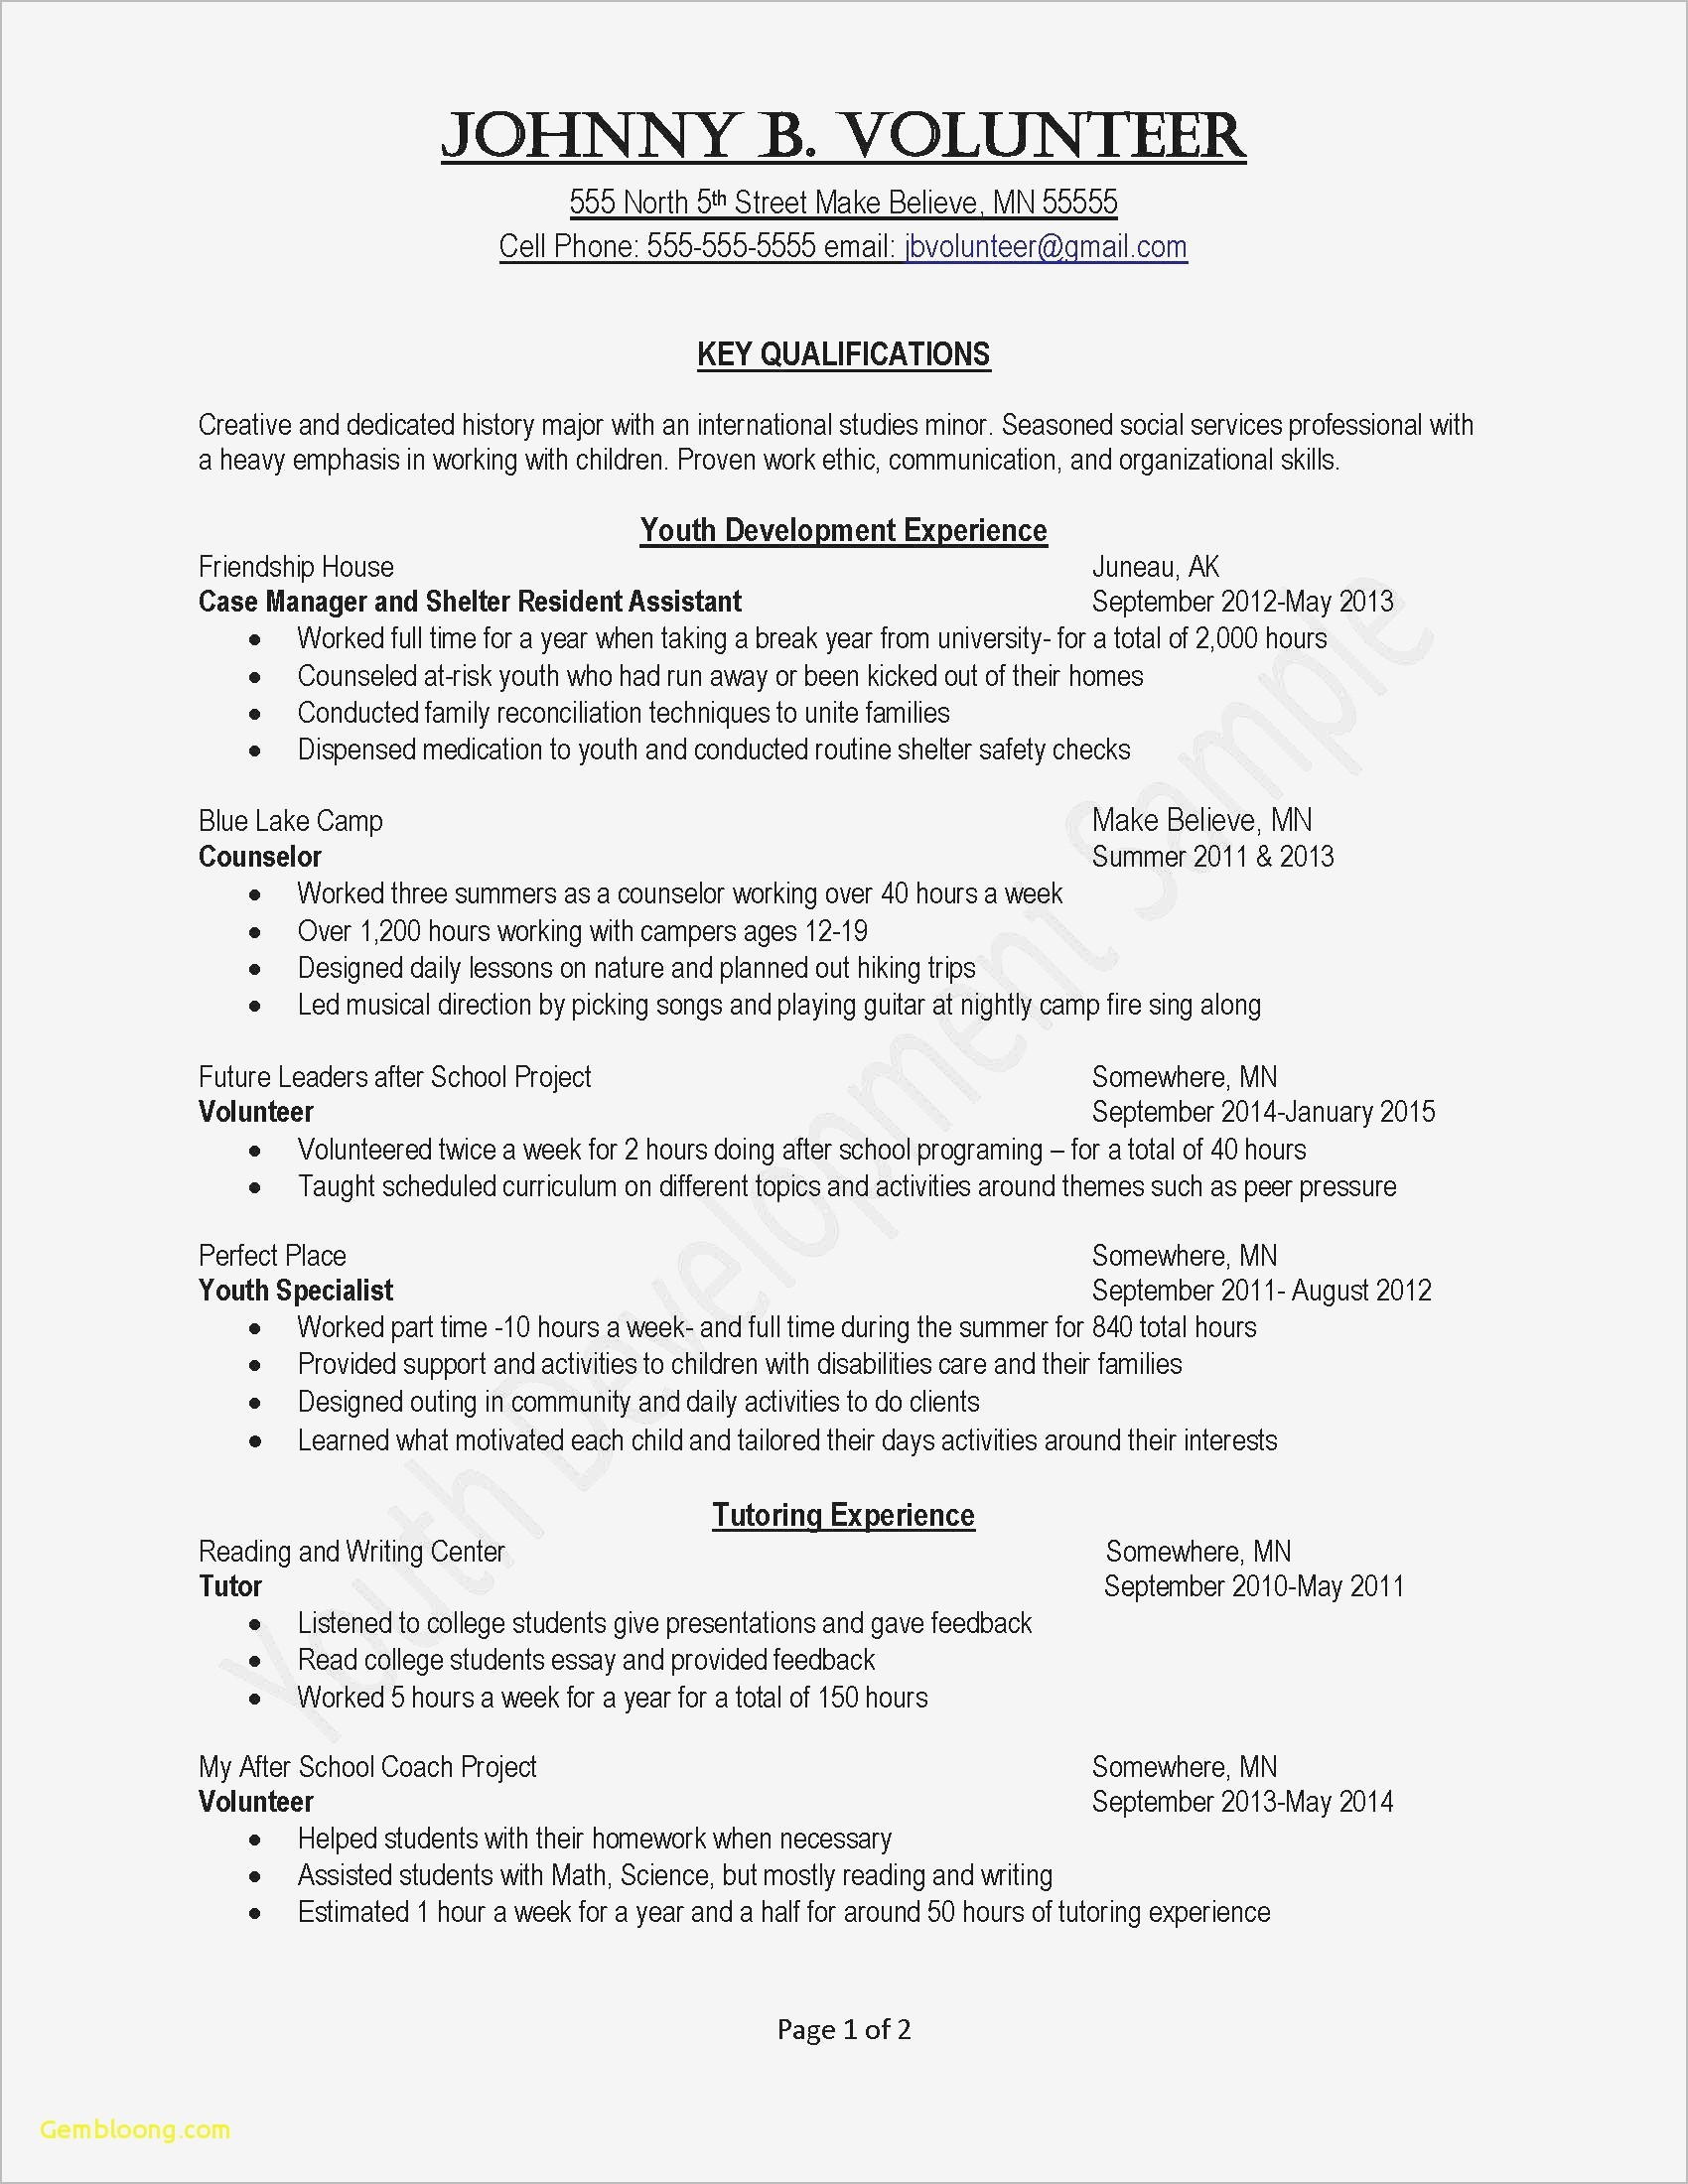 expert opinion letter template Collection-Job fer Letter Template Us Copy Od Consultant Cover Letter Fungram Valid Simple Cover Letter Template 19-f